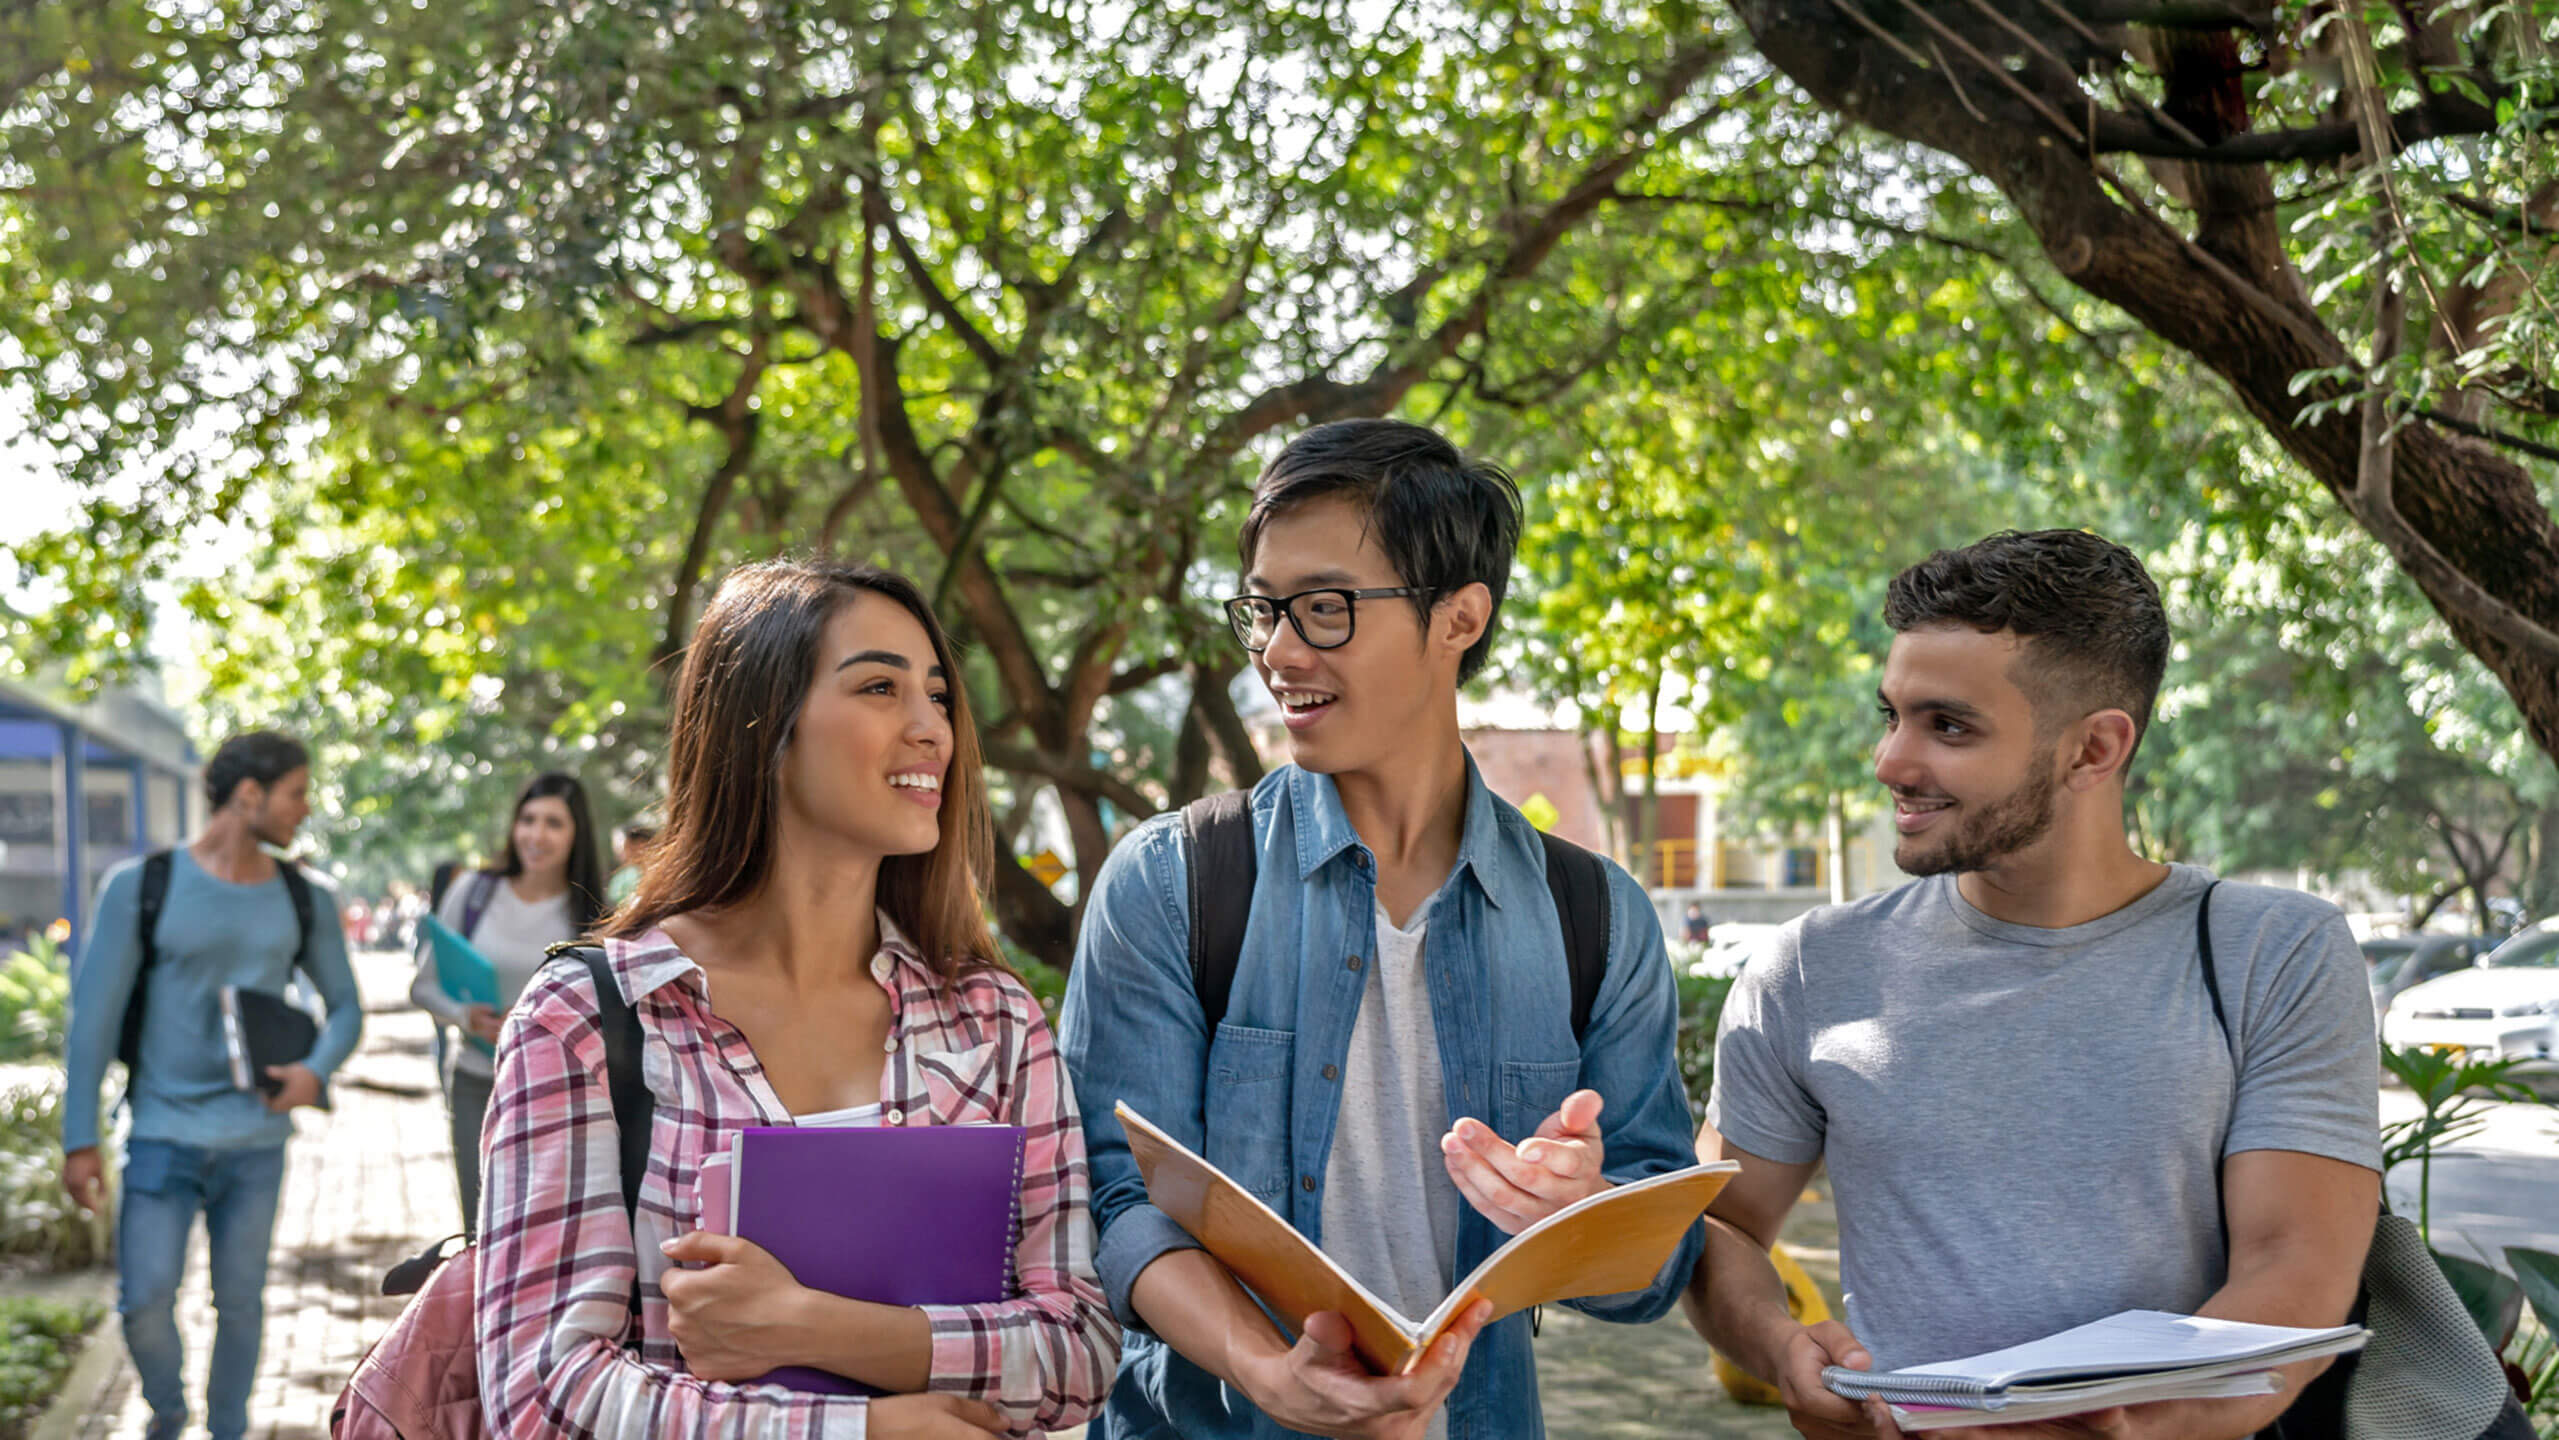 Is studying abroad in Singapore a government school or an international school?